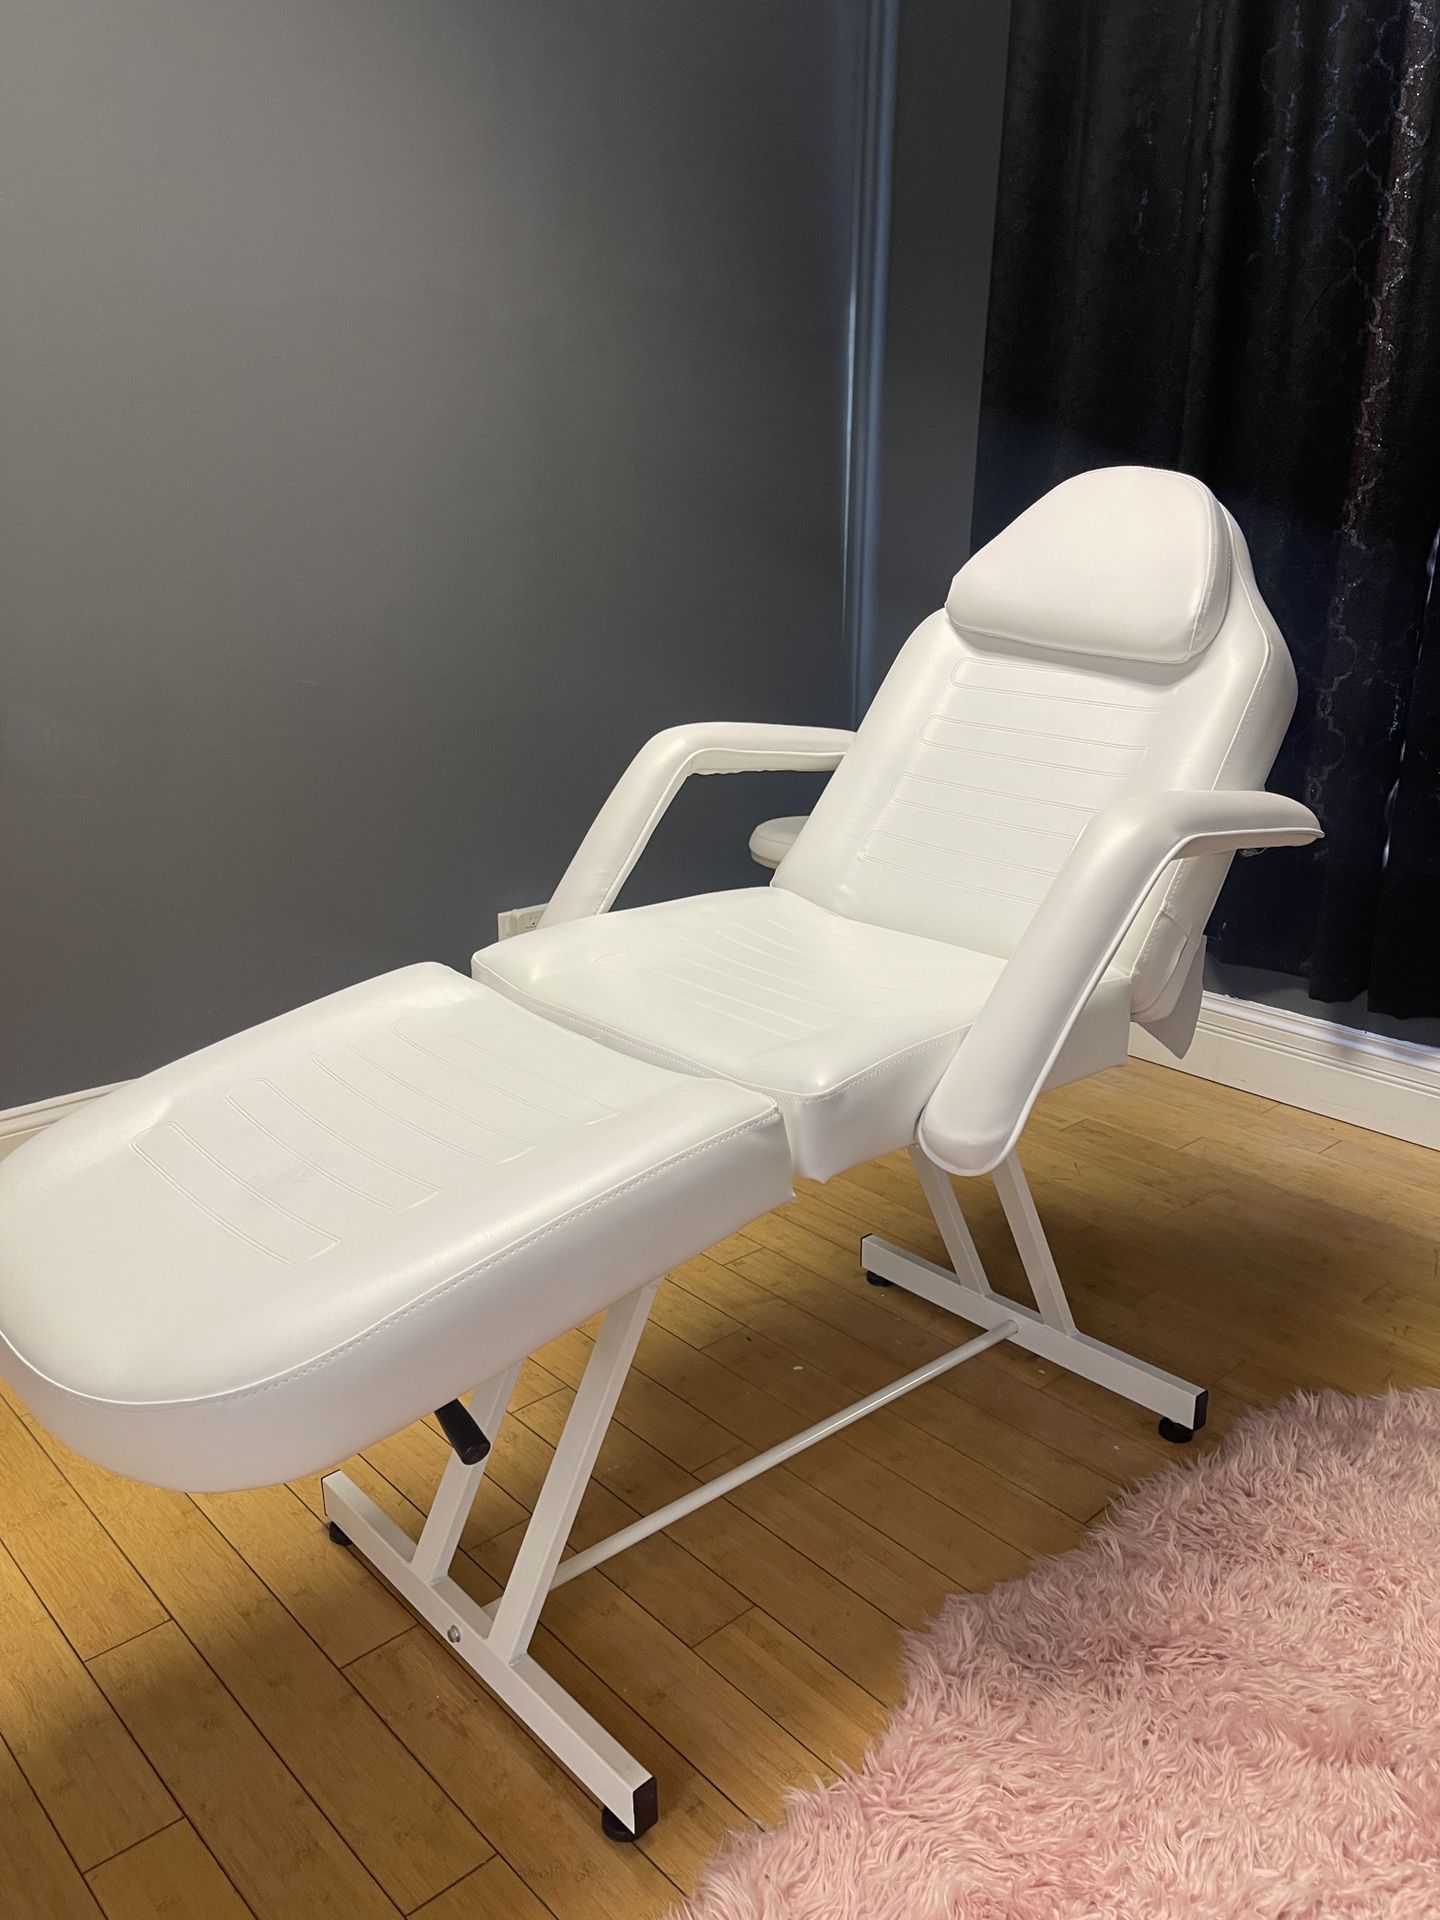 Esthetician Bed And stool 